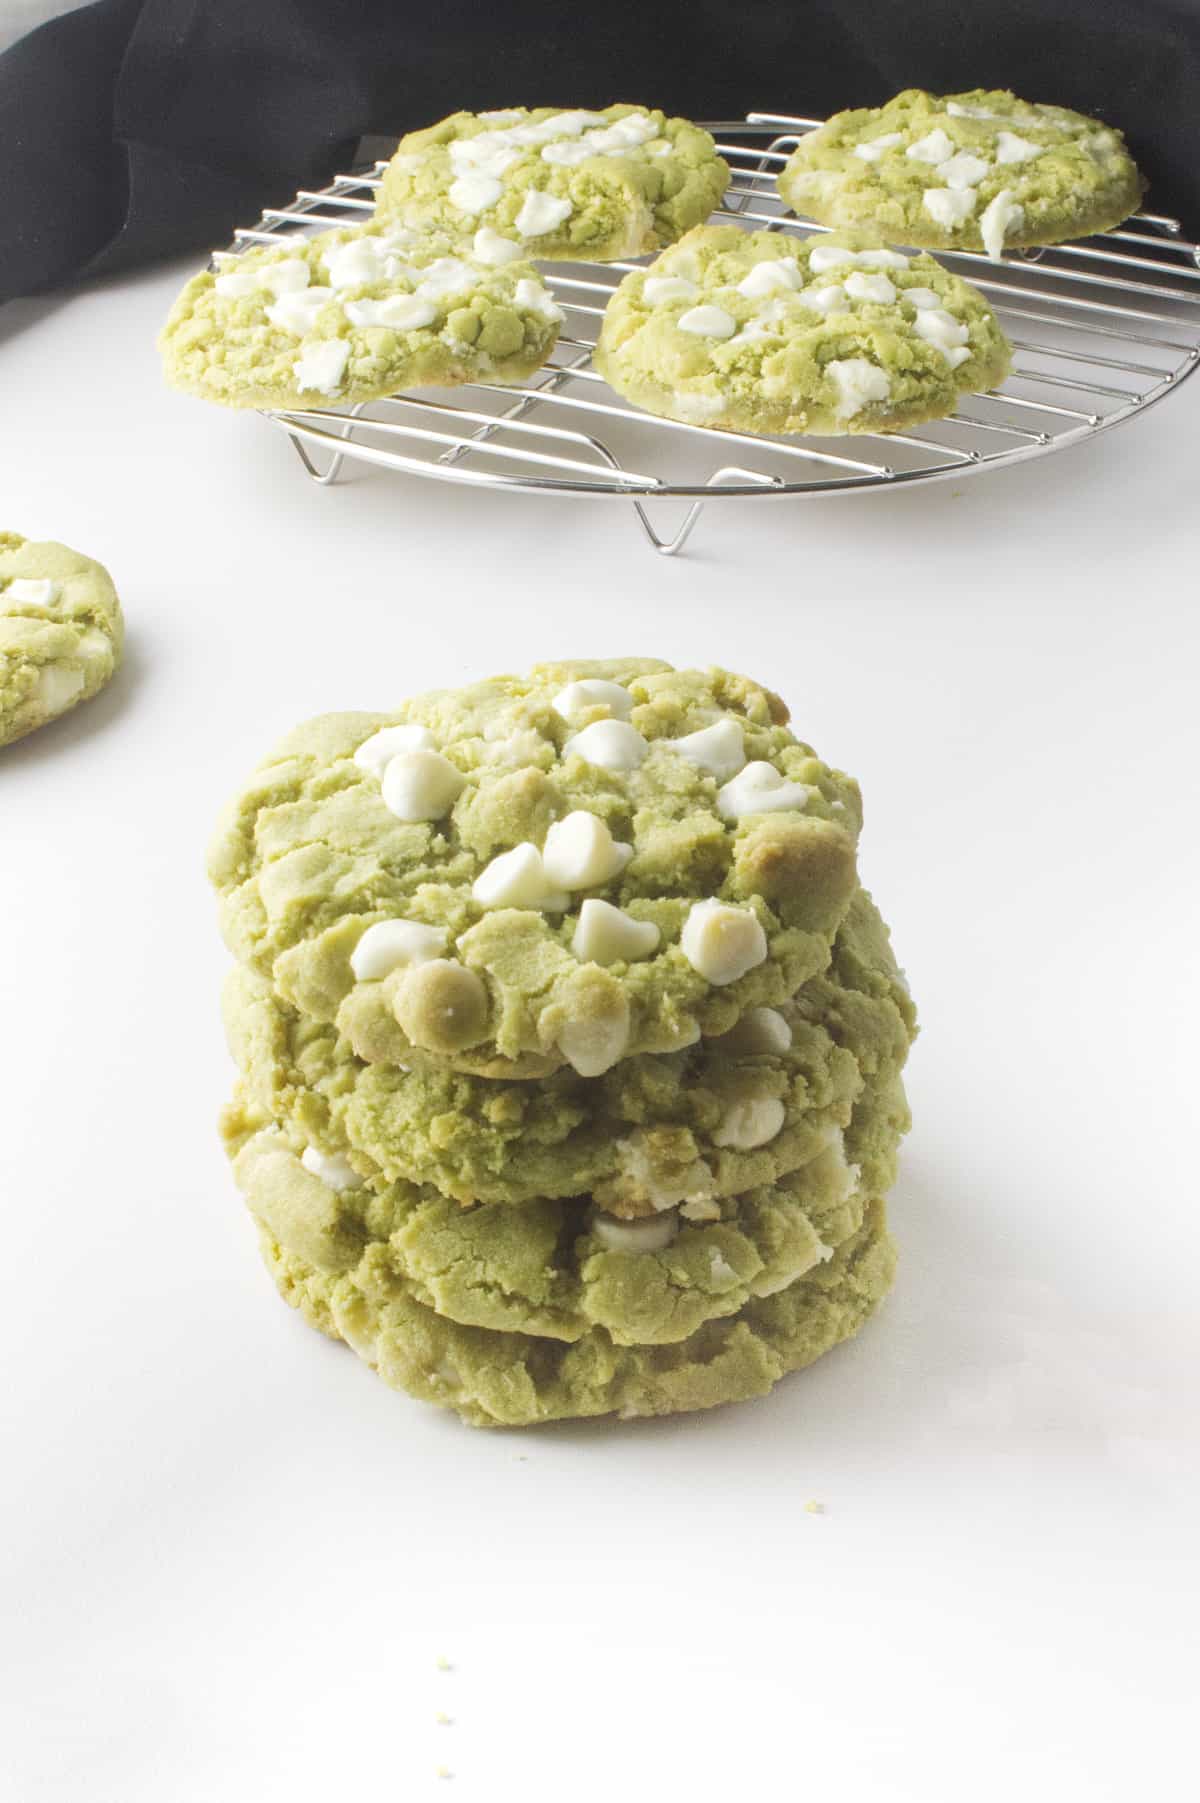 stack of matcha green tea cookies with white chocolate chips.